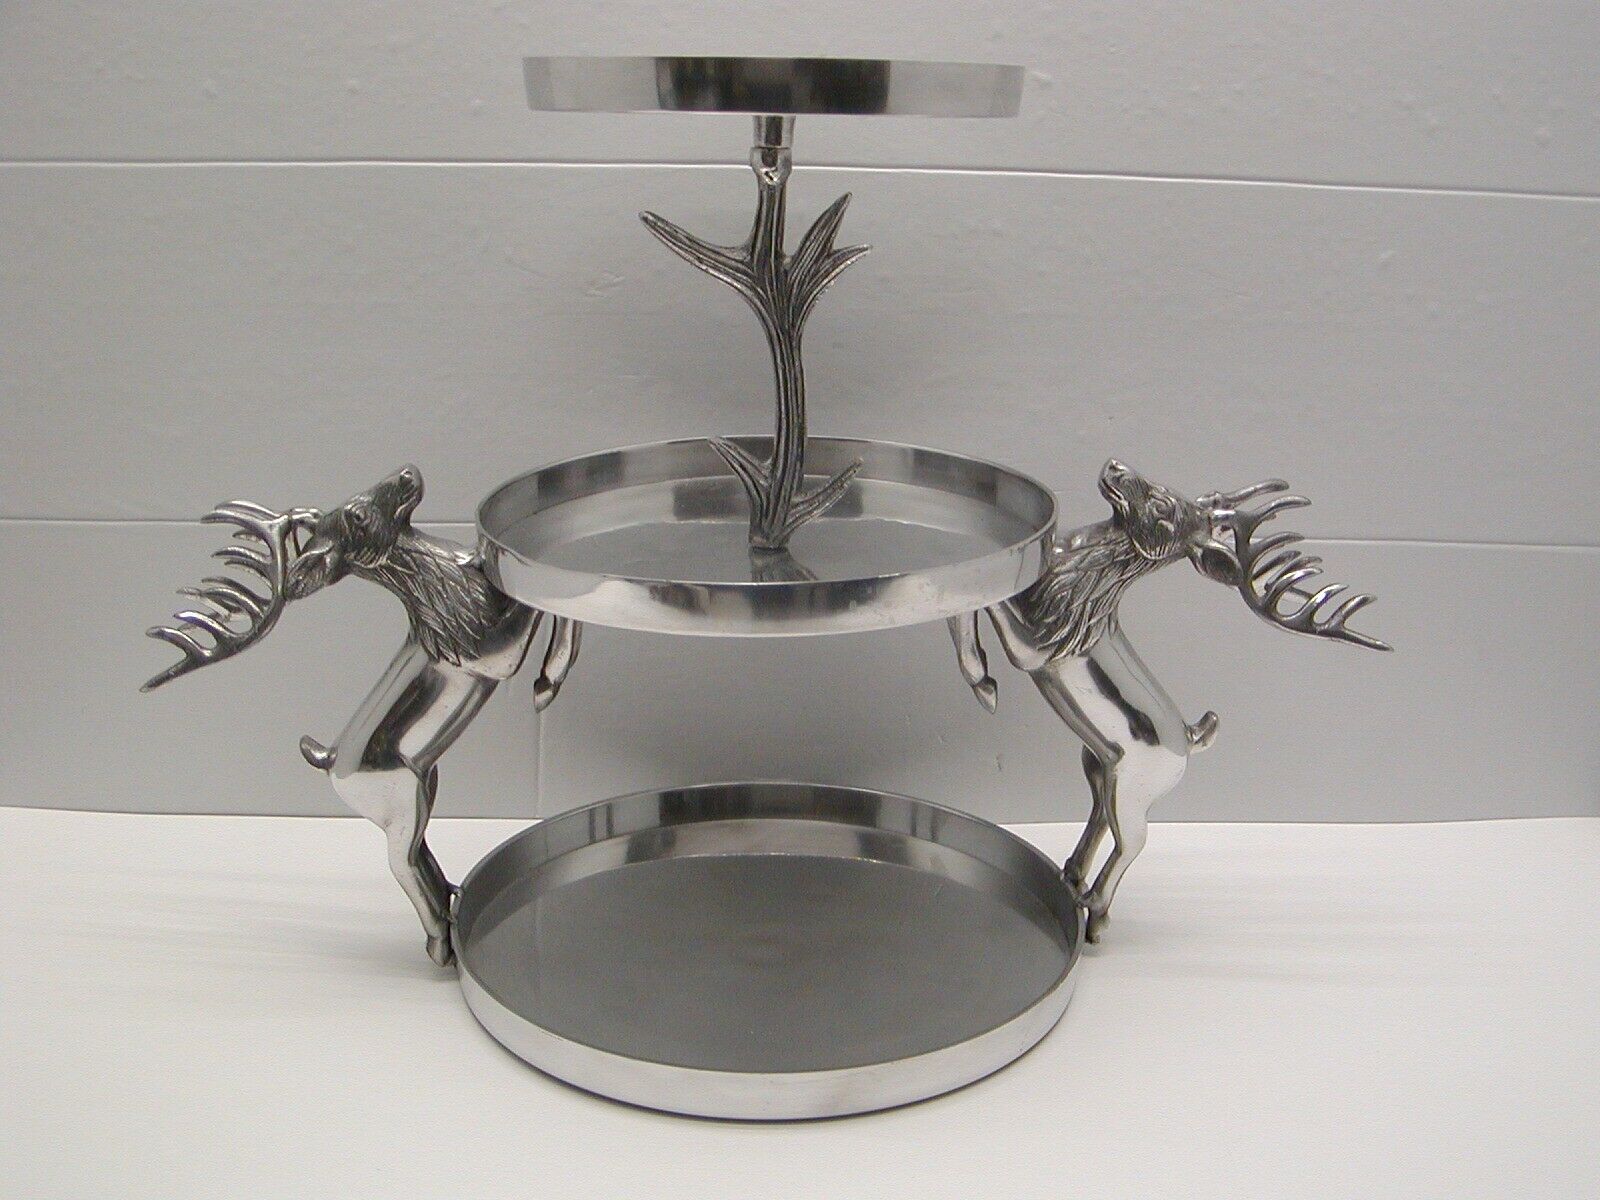 2 DEER STAINLESS 3 TIER  SERVING TRAY